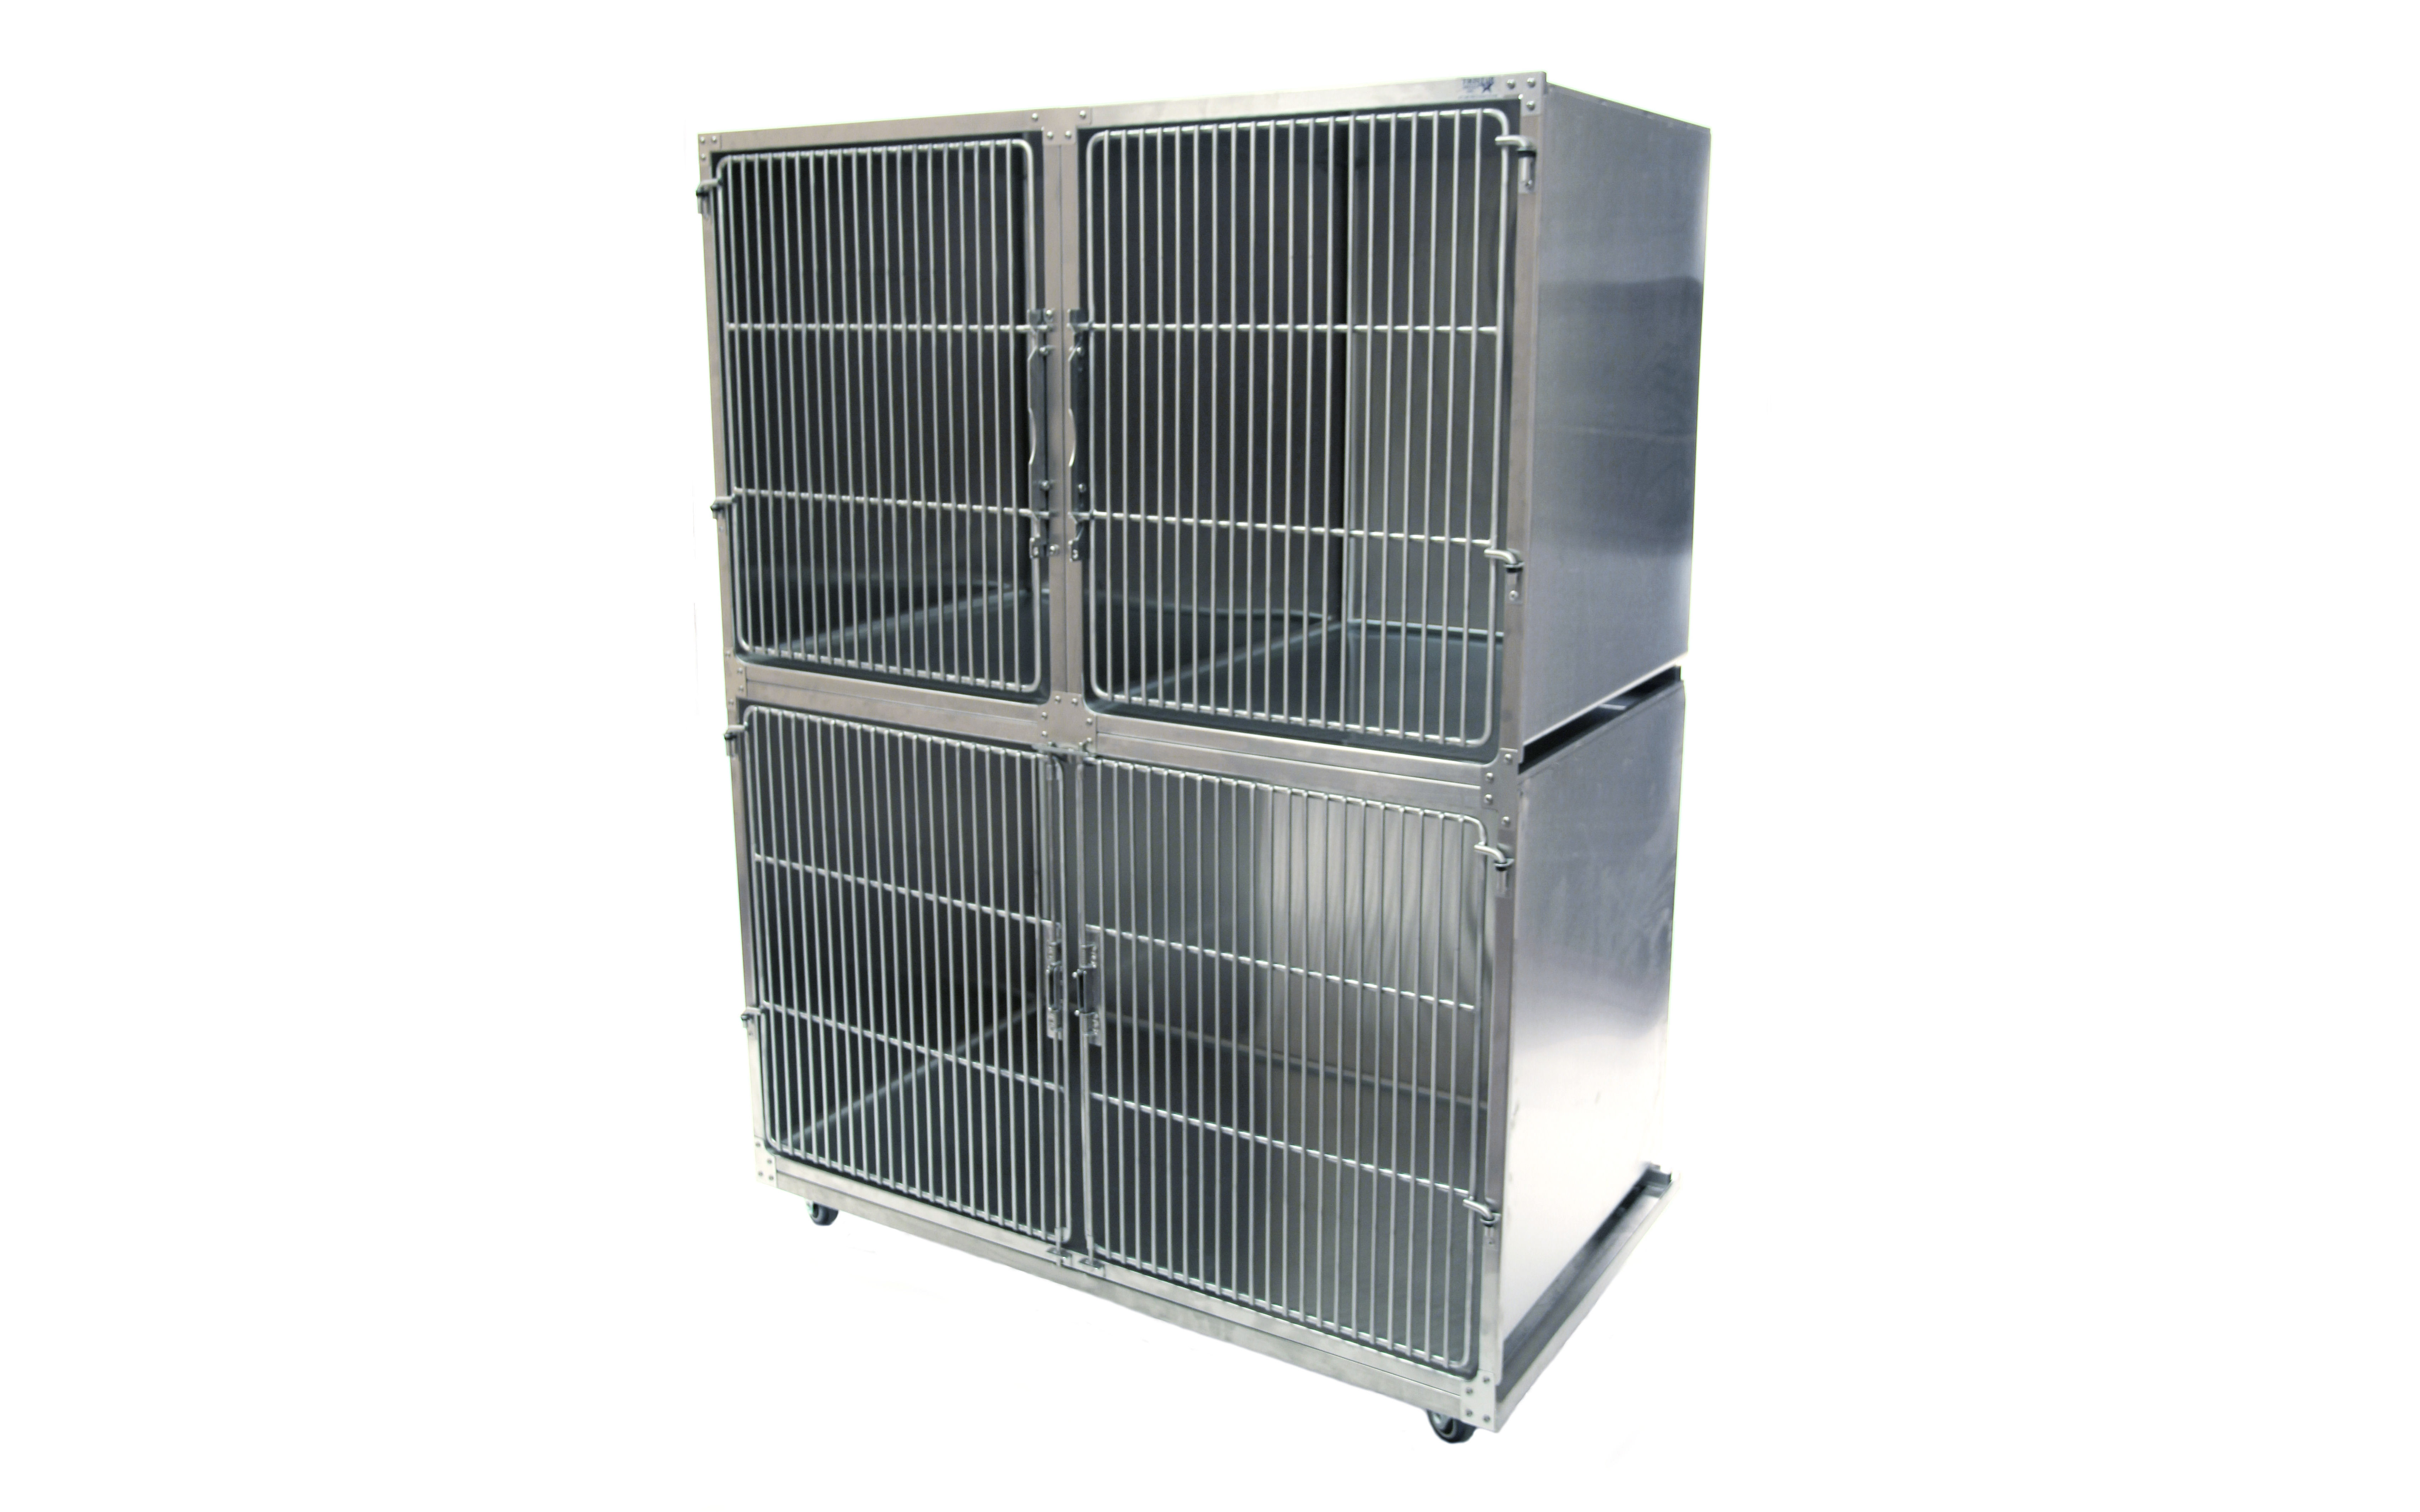 stainless steel kennel cages